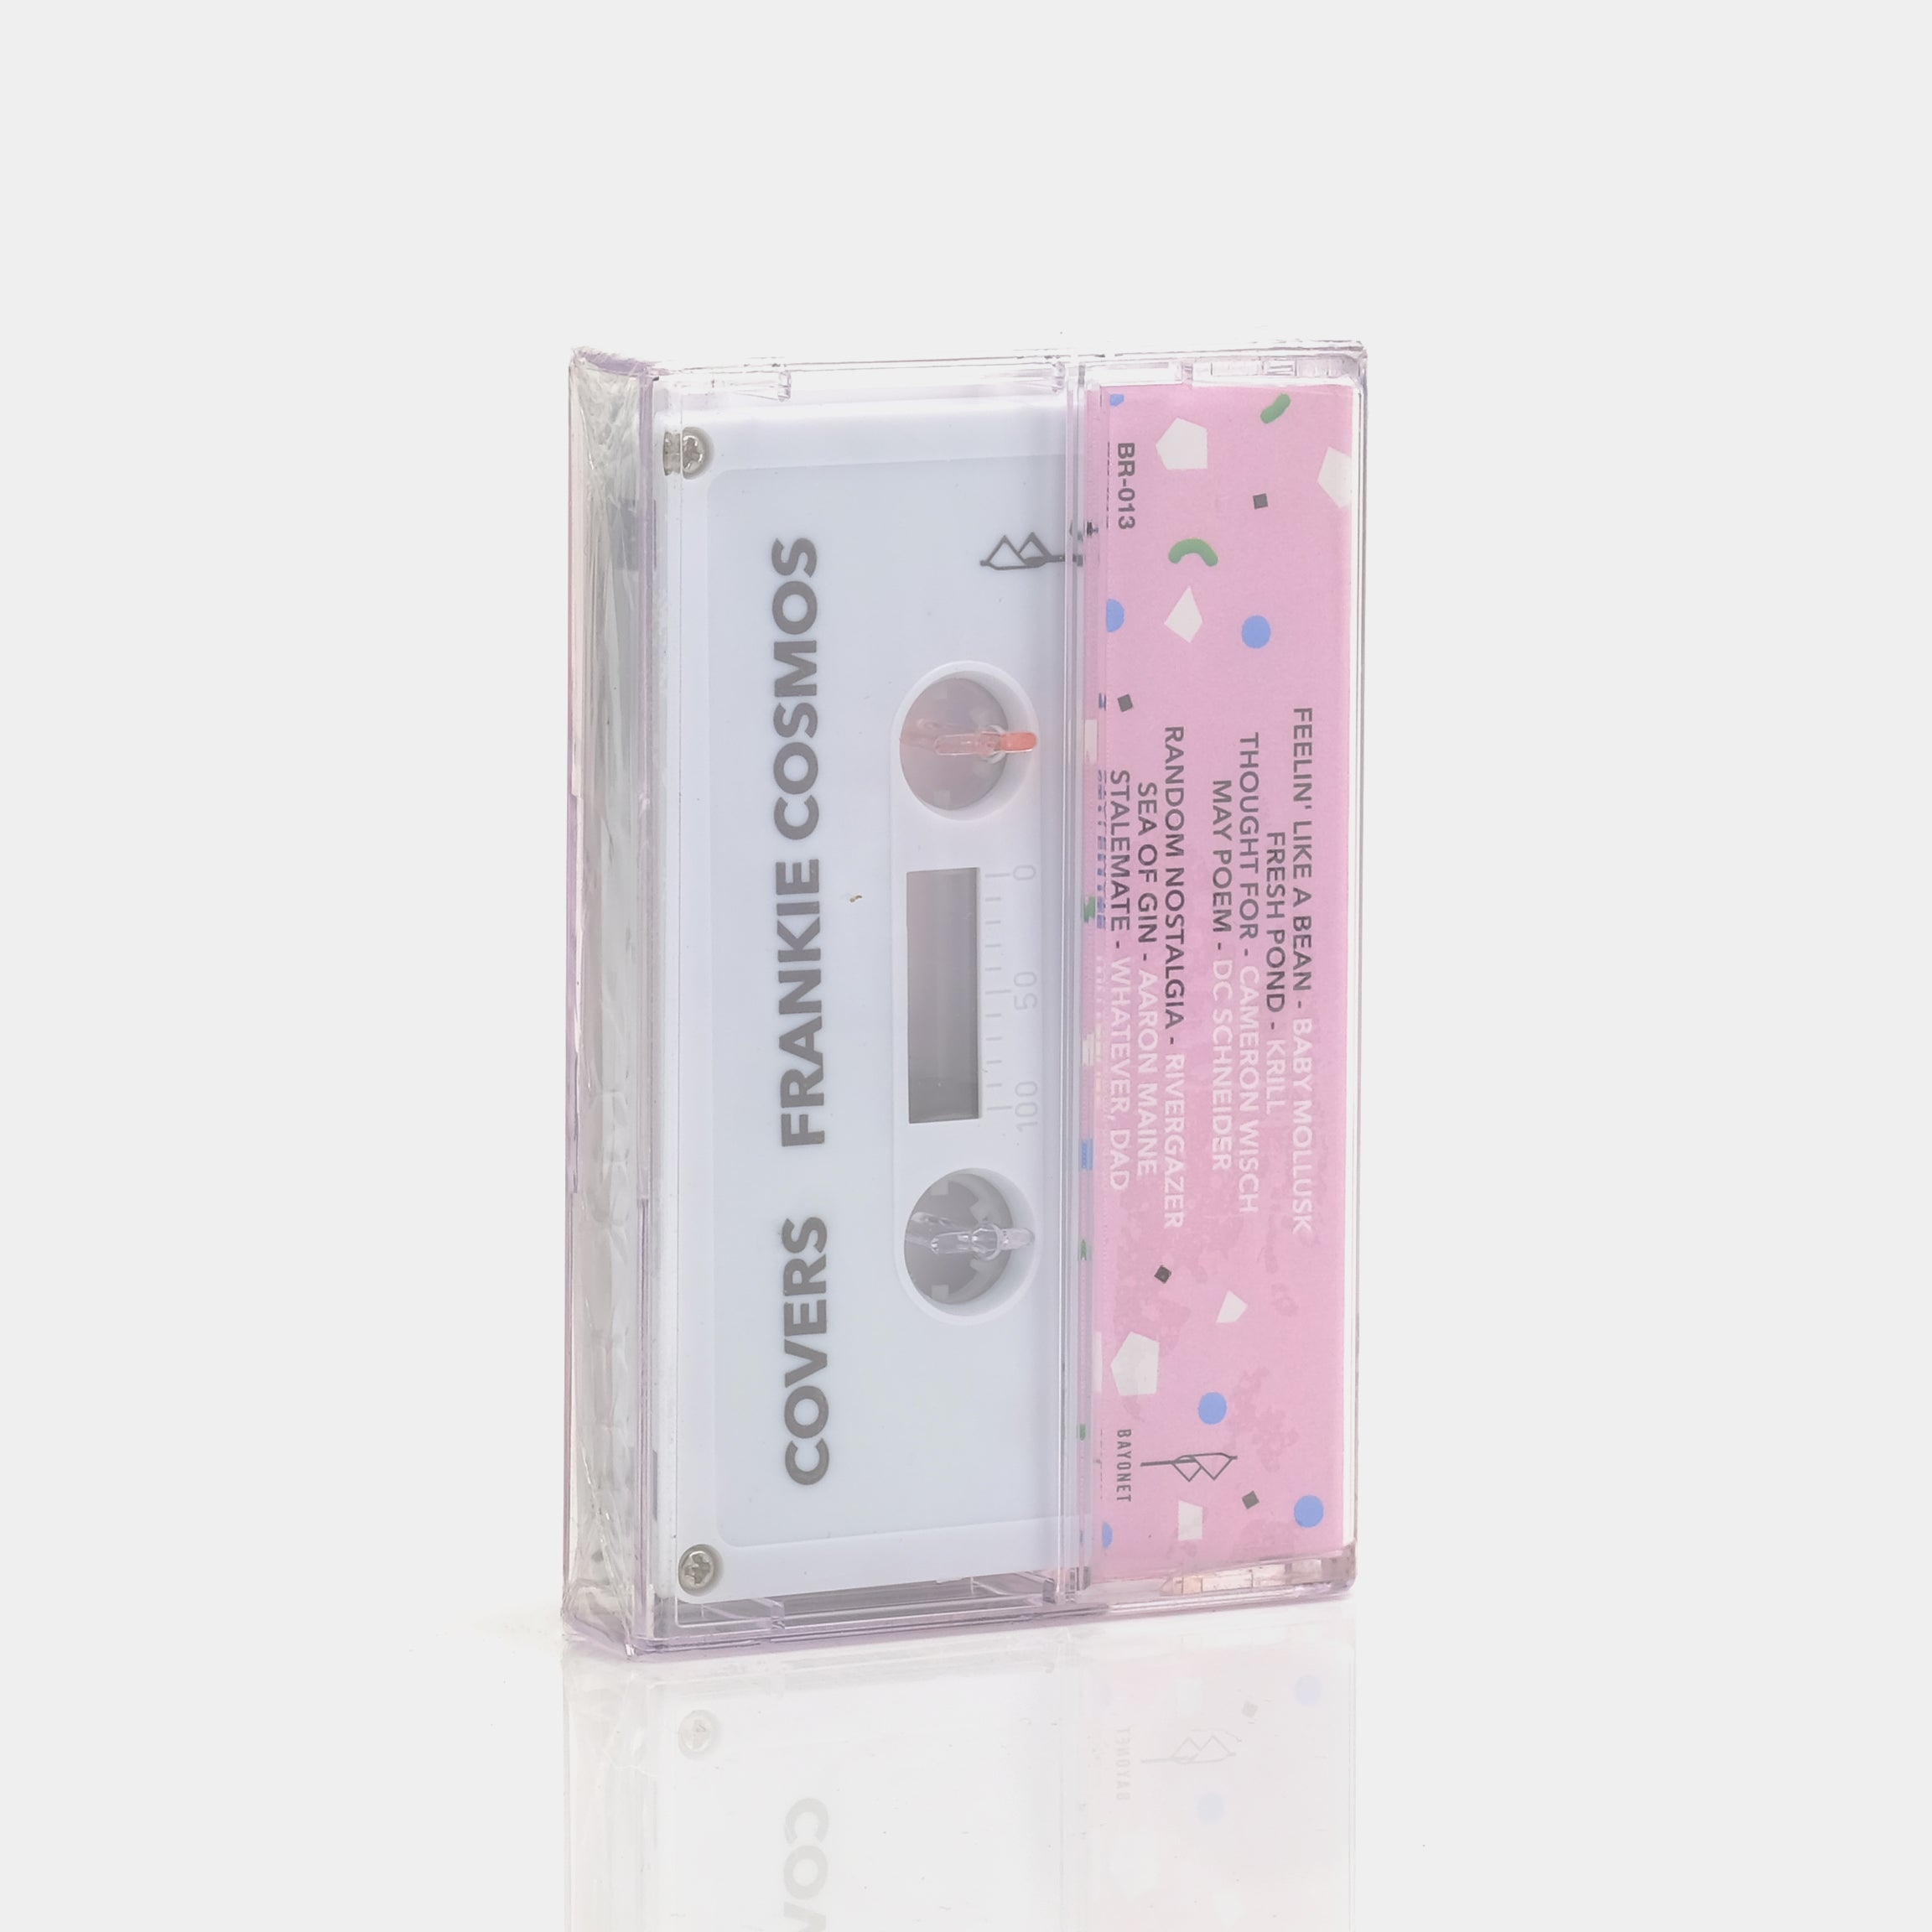 Frankie Cosmos - Covers Cassette Tape